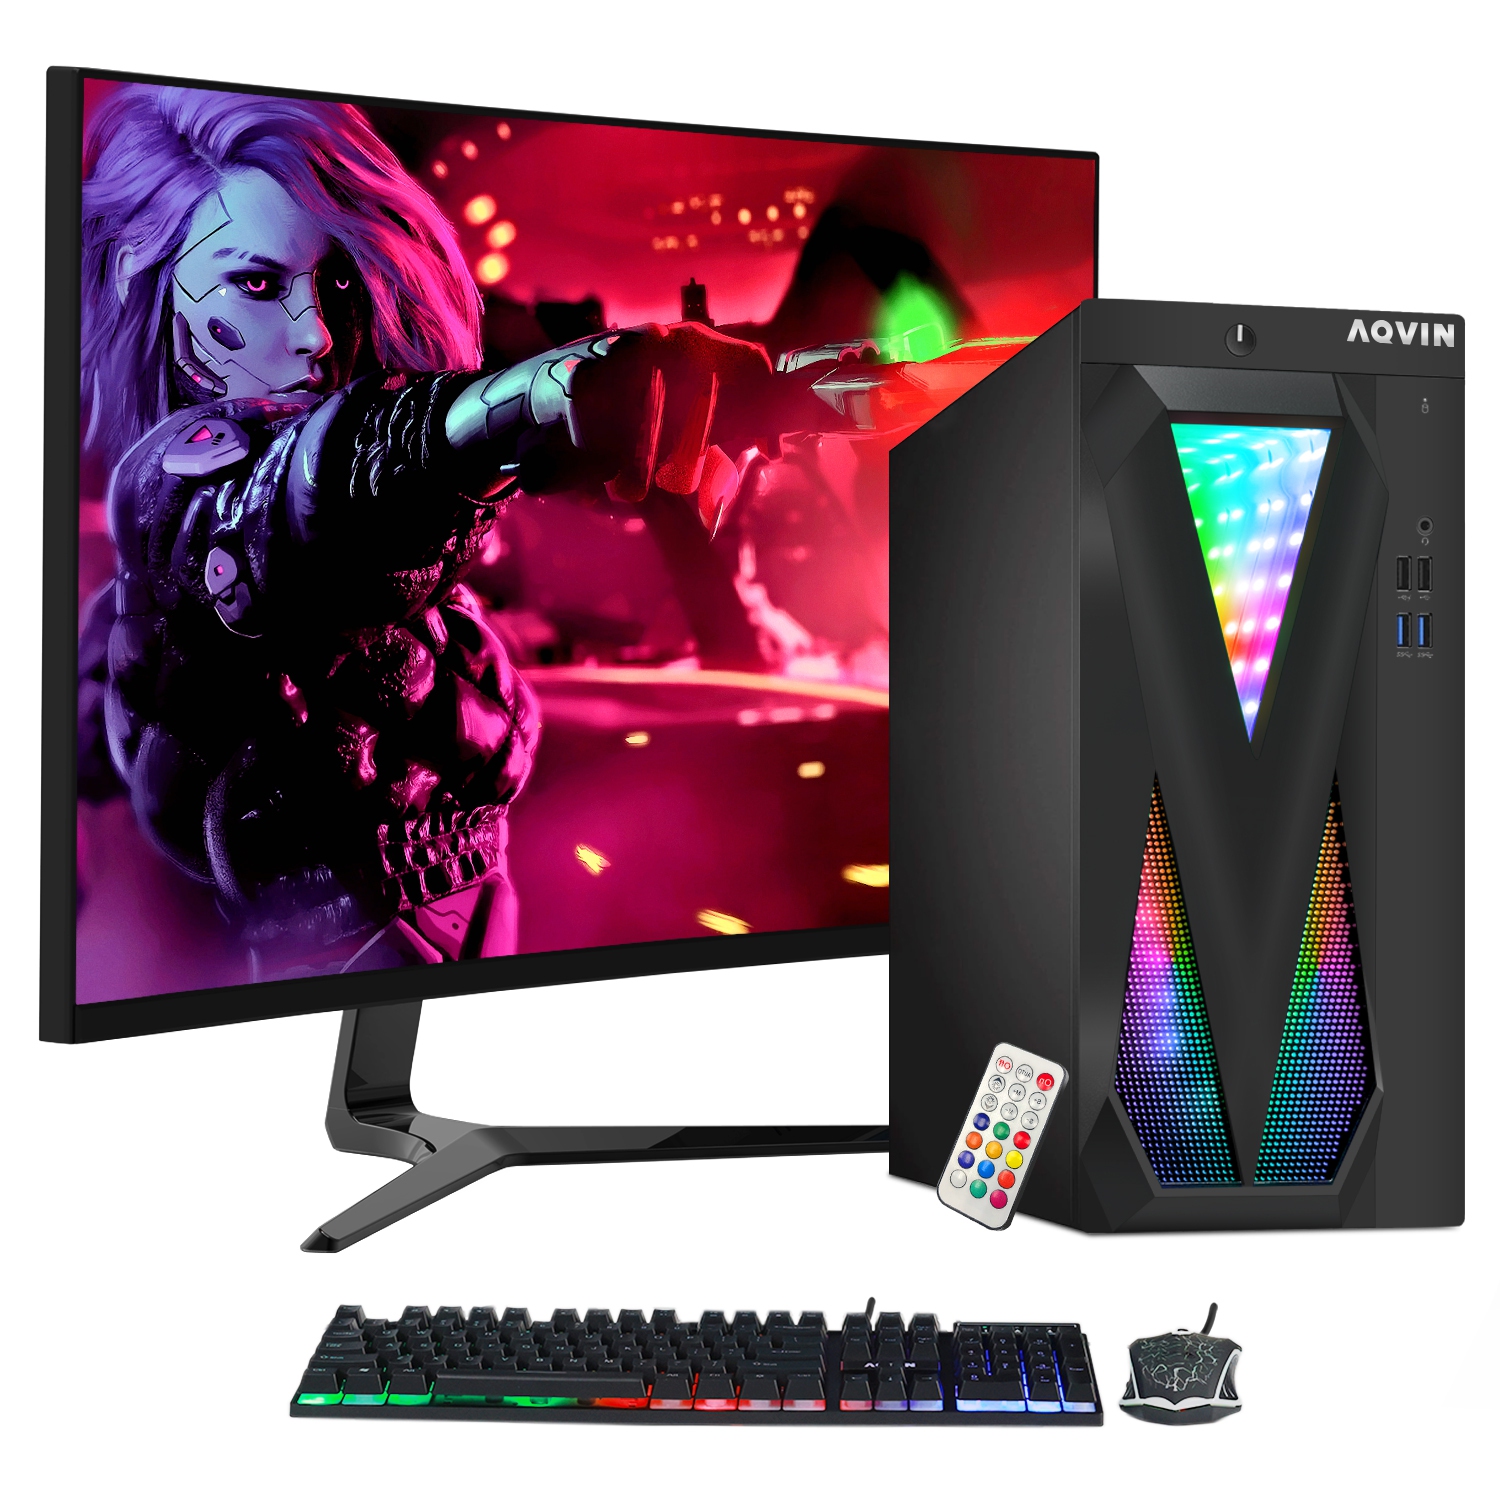 Refurbished (Excellent) - AQVIN InfinityLite Gaming PC Combo Desktop Computer New 27inch Curved Monitor Intel Core i7 Processor 32GB RAM 1TB SSD AMD RX 550 DDR5 HDMI Windows 10 Pro